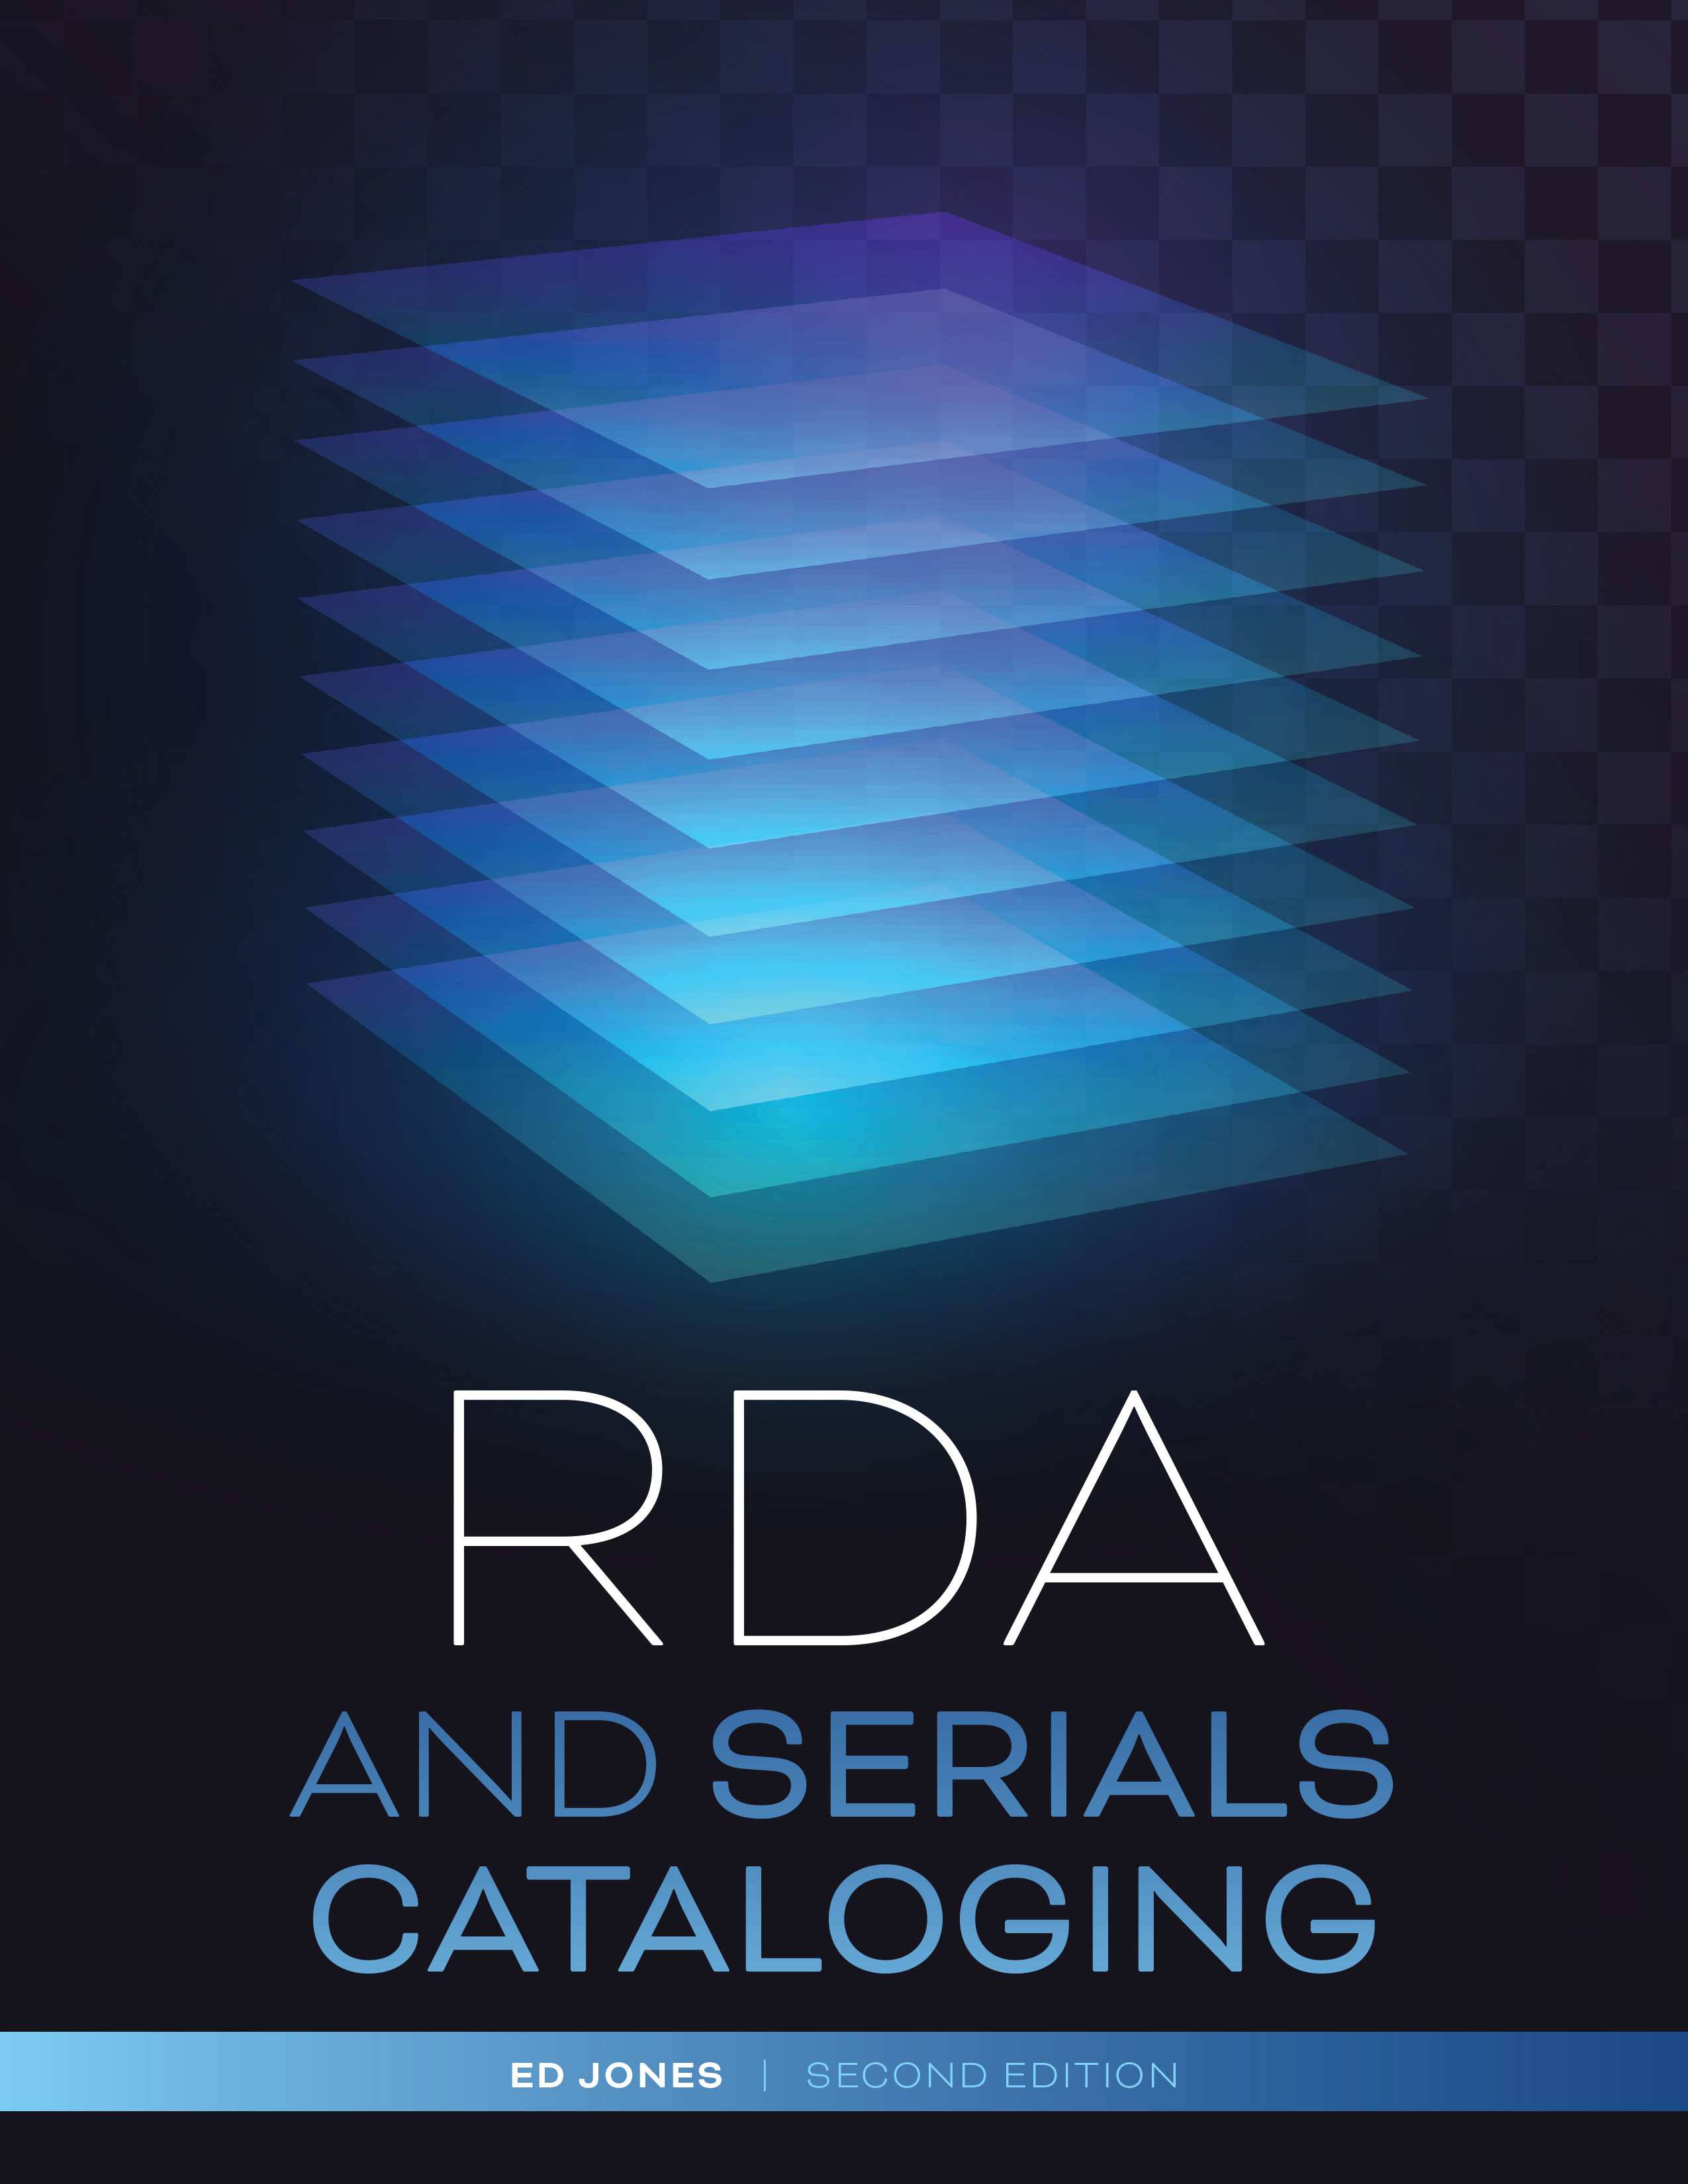 Image for RDA and Serials Cataloging, Second Edition